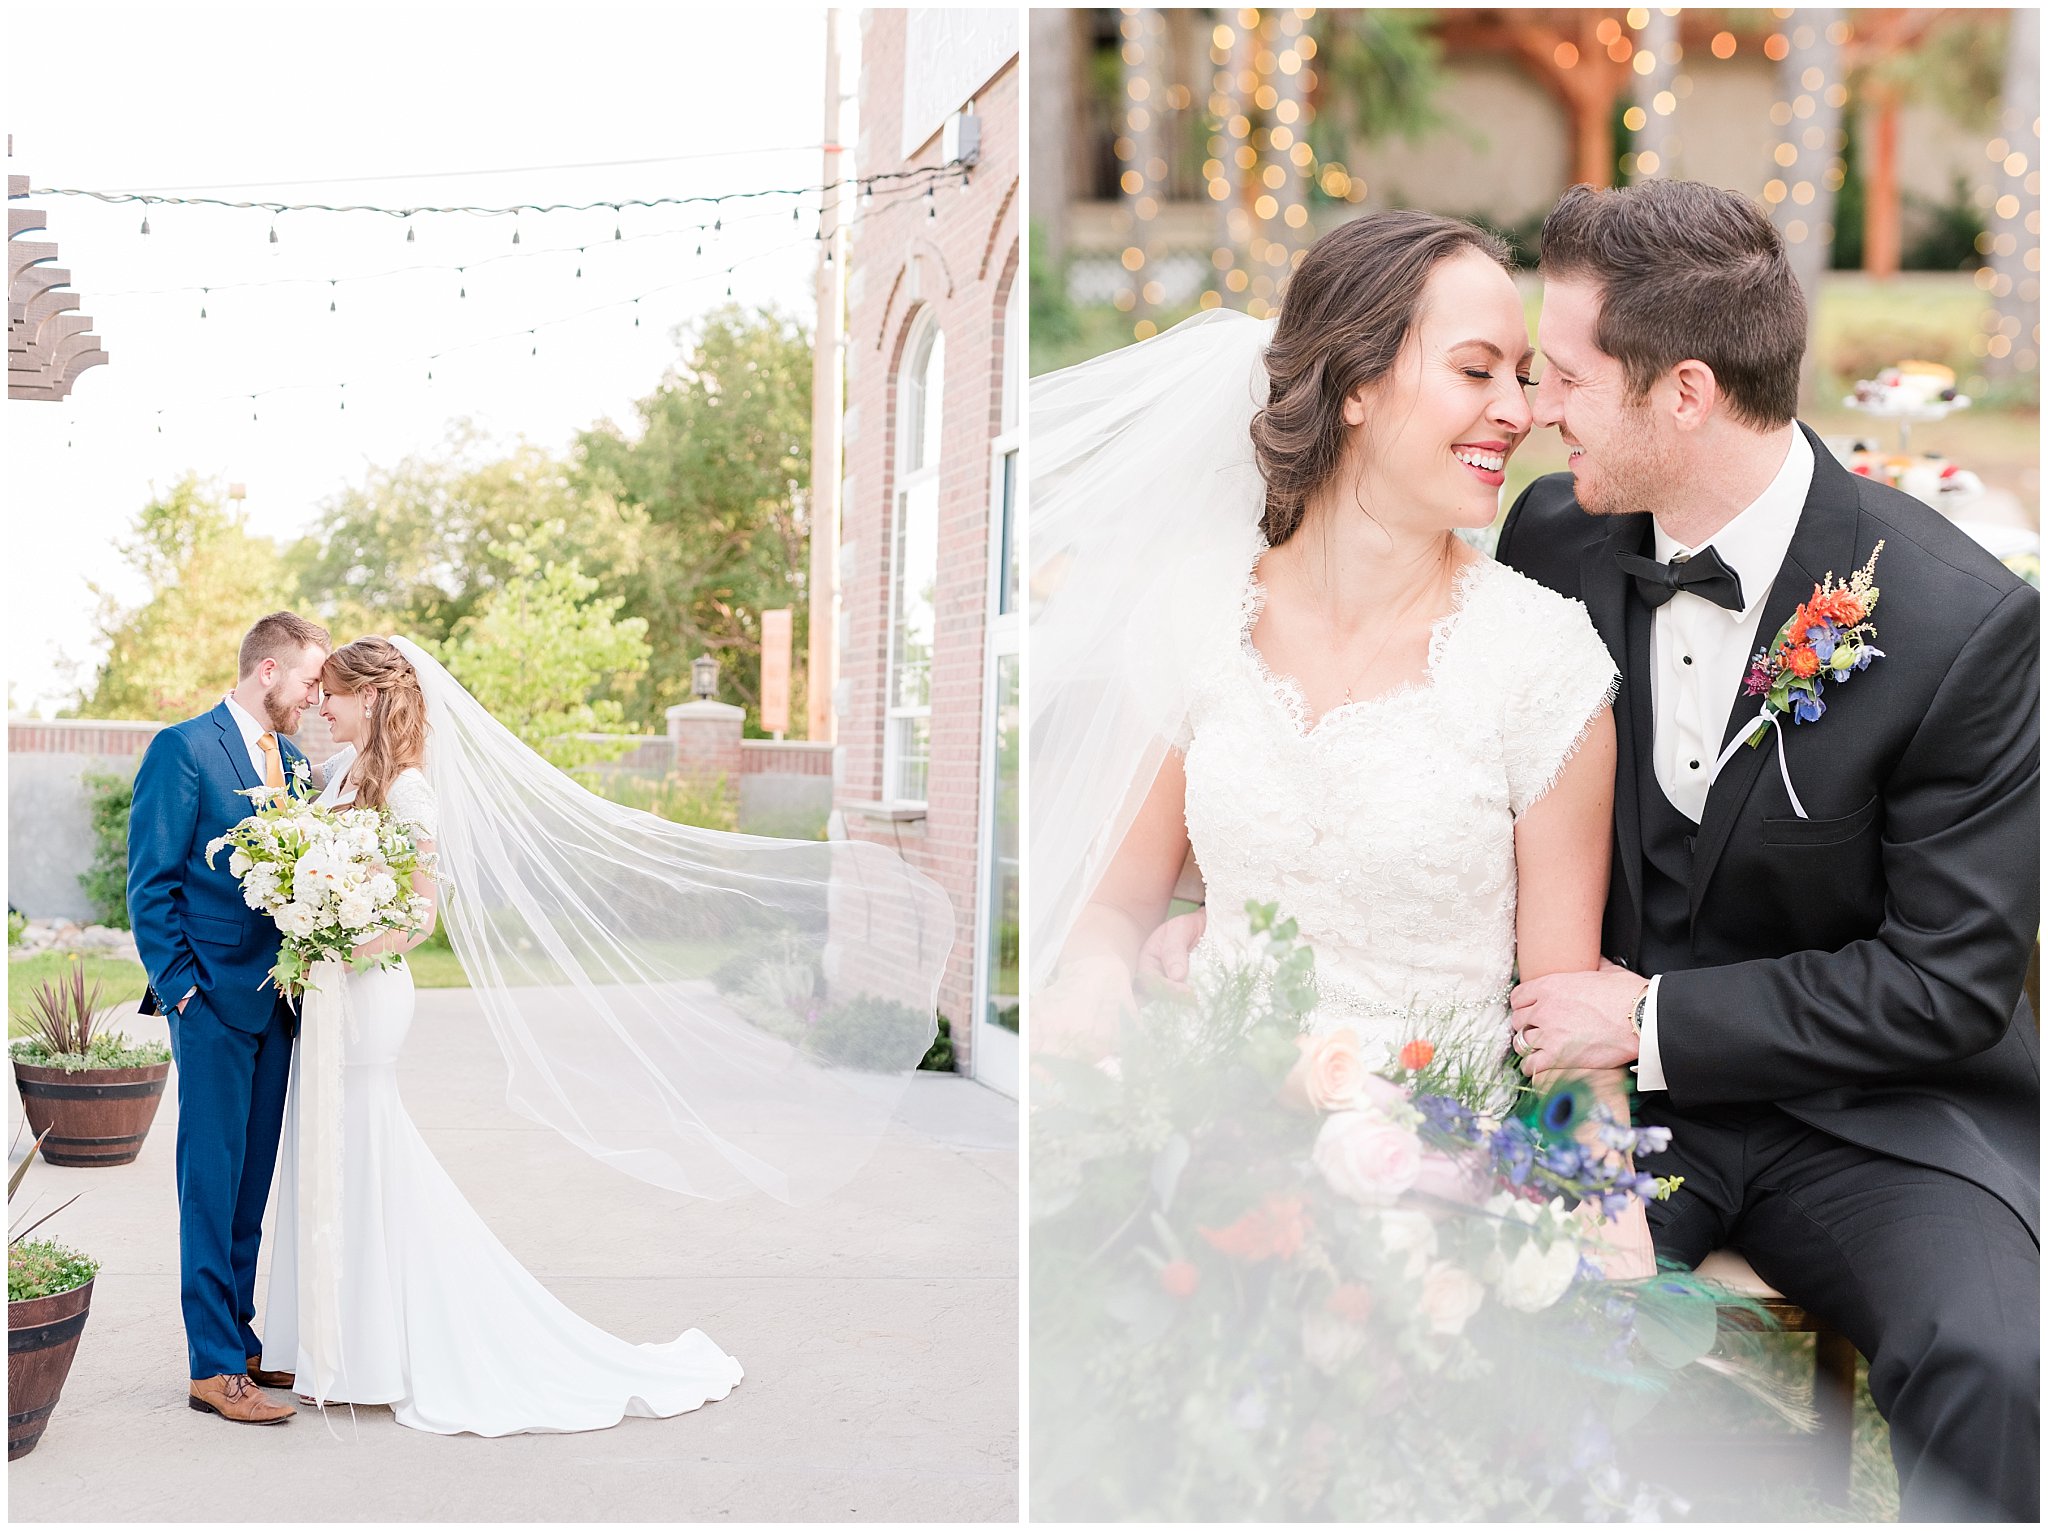 Bride and Groom romantic veil photos at Utah wedding venues | Why a Wedding Veil Could be Your Favorite Wedding Detail and What to look for | Jessie and Dallin Photography